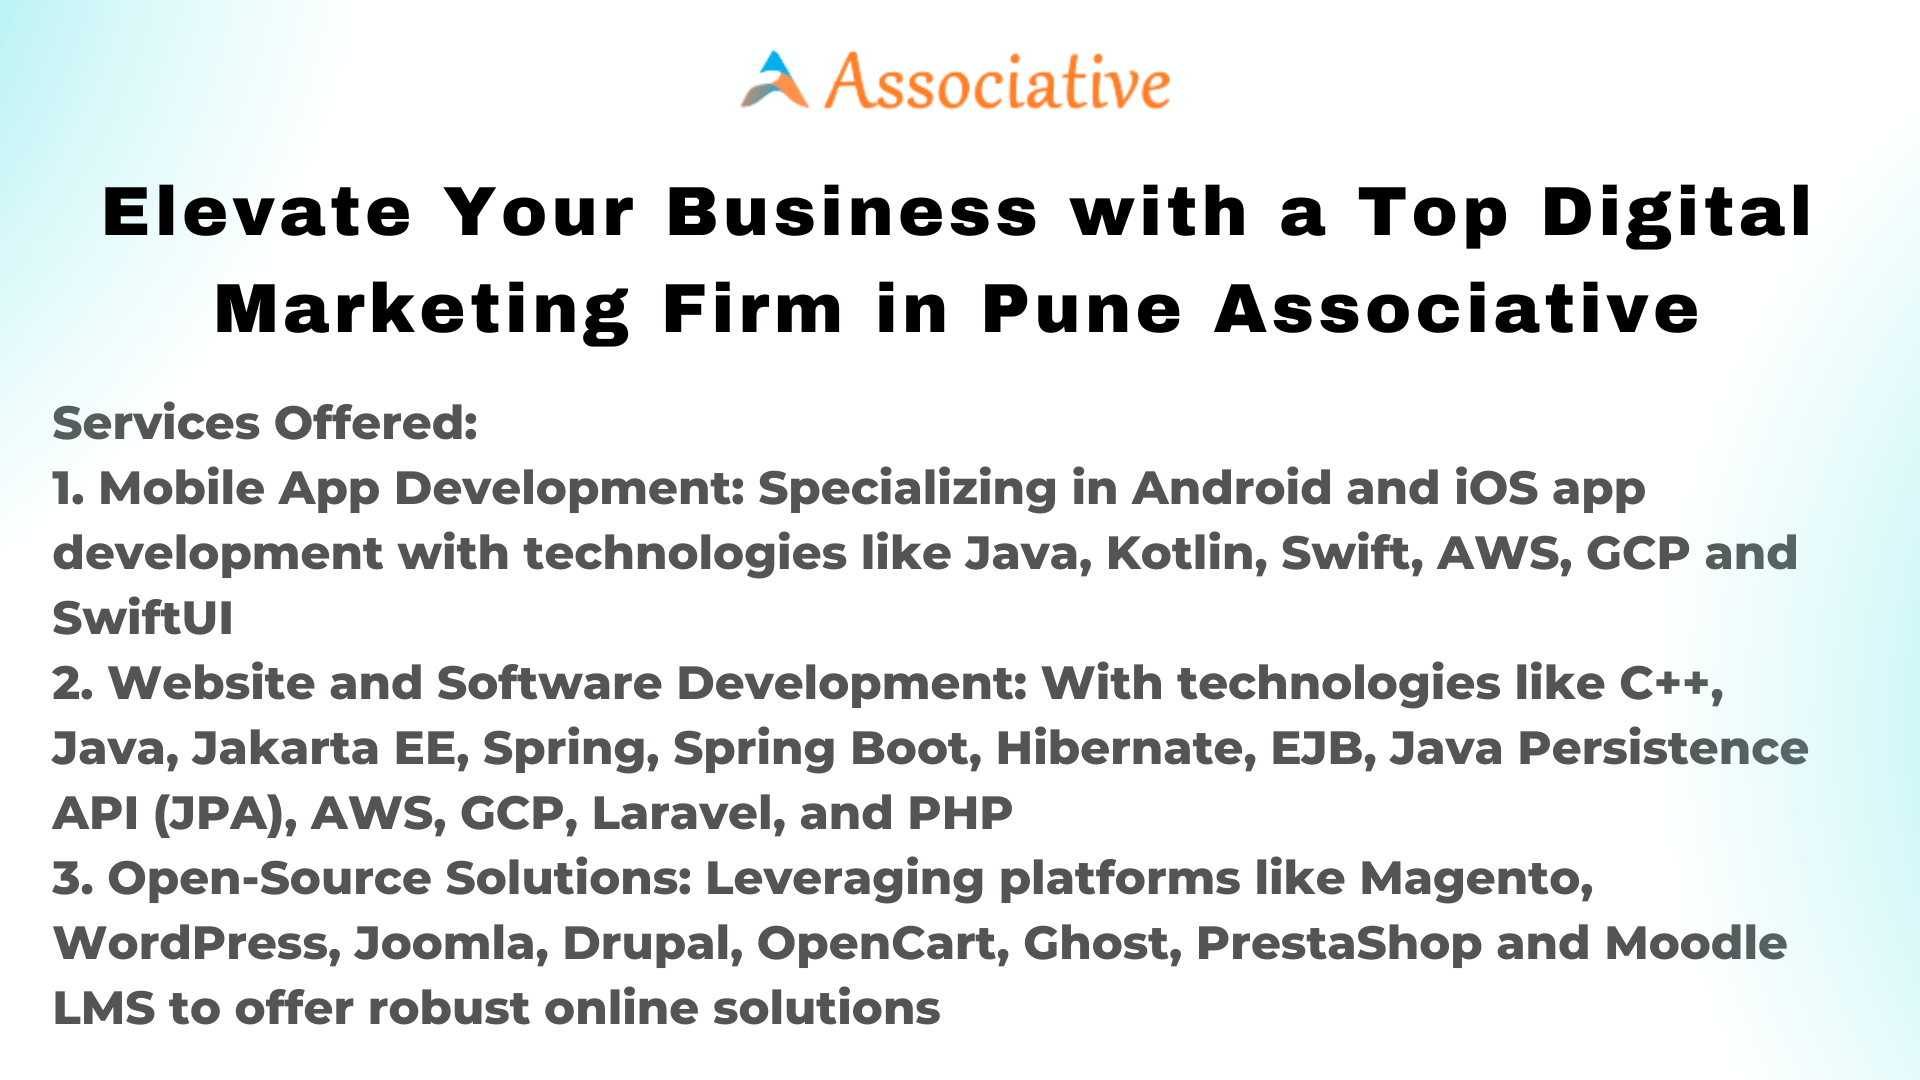 Elevate Your Business with a Top Digital Marketing Firm in Pune Associative